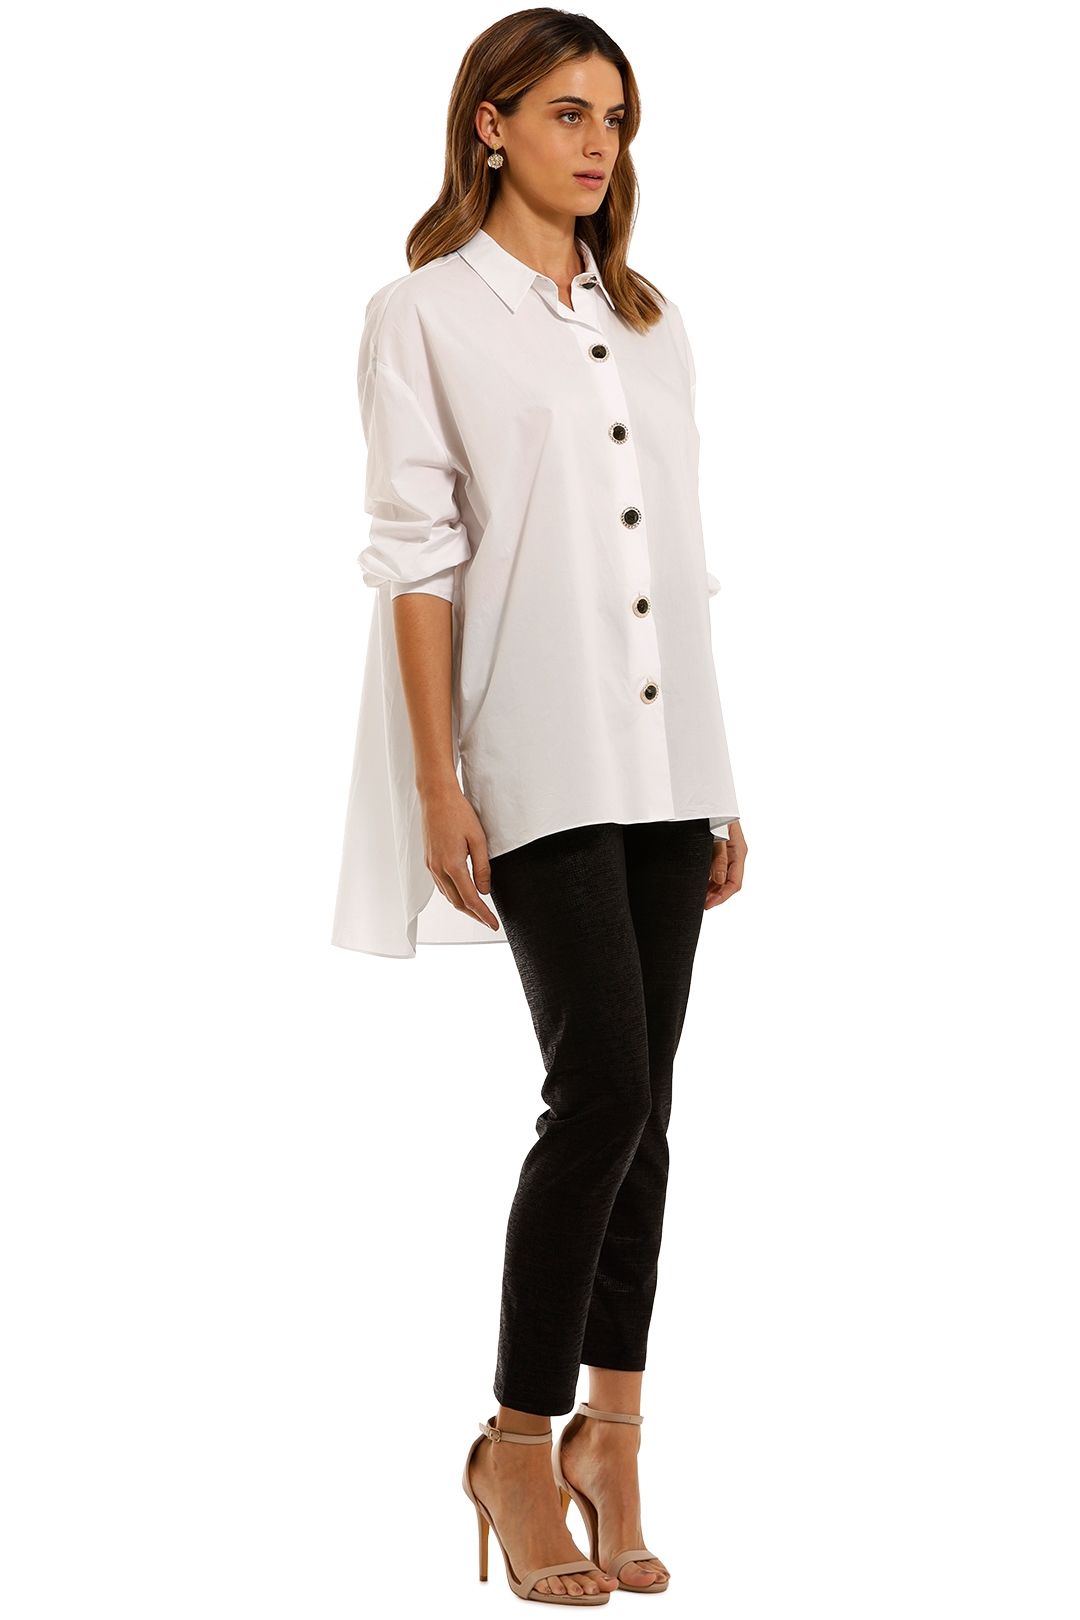 Cooper by Trelise Cooper Button Me Up Shirt high low